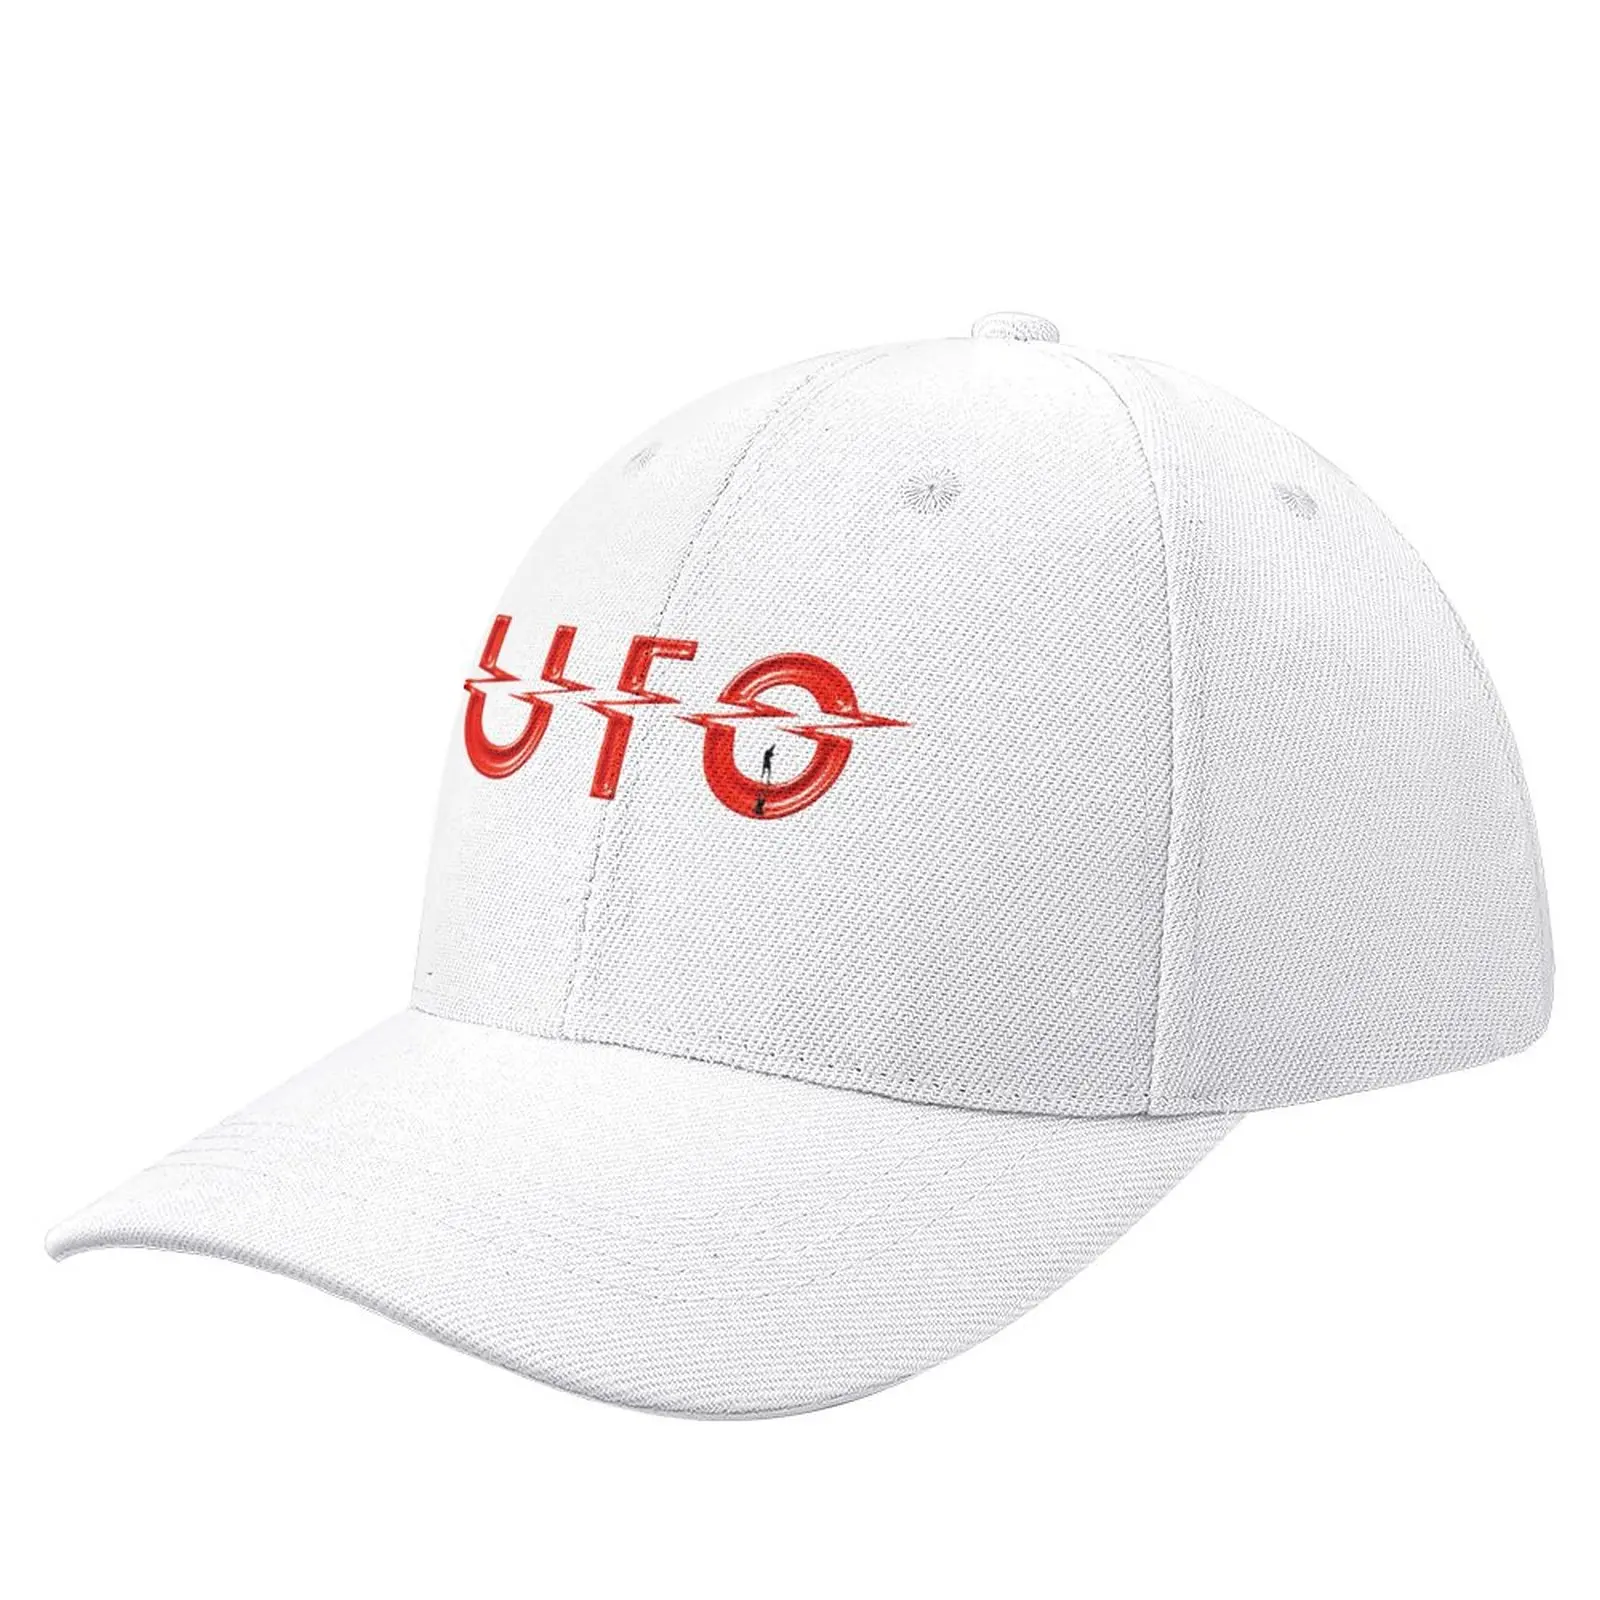 

UFO are an English rock band that was formed in London in 1968 Baseball Cap Brand Man cap New In The Hat party Hat Mens Women's